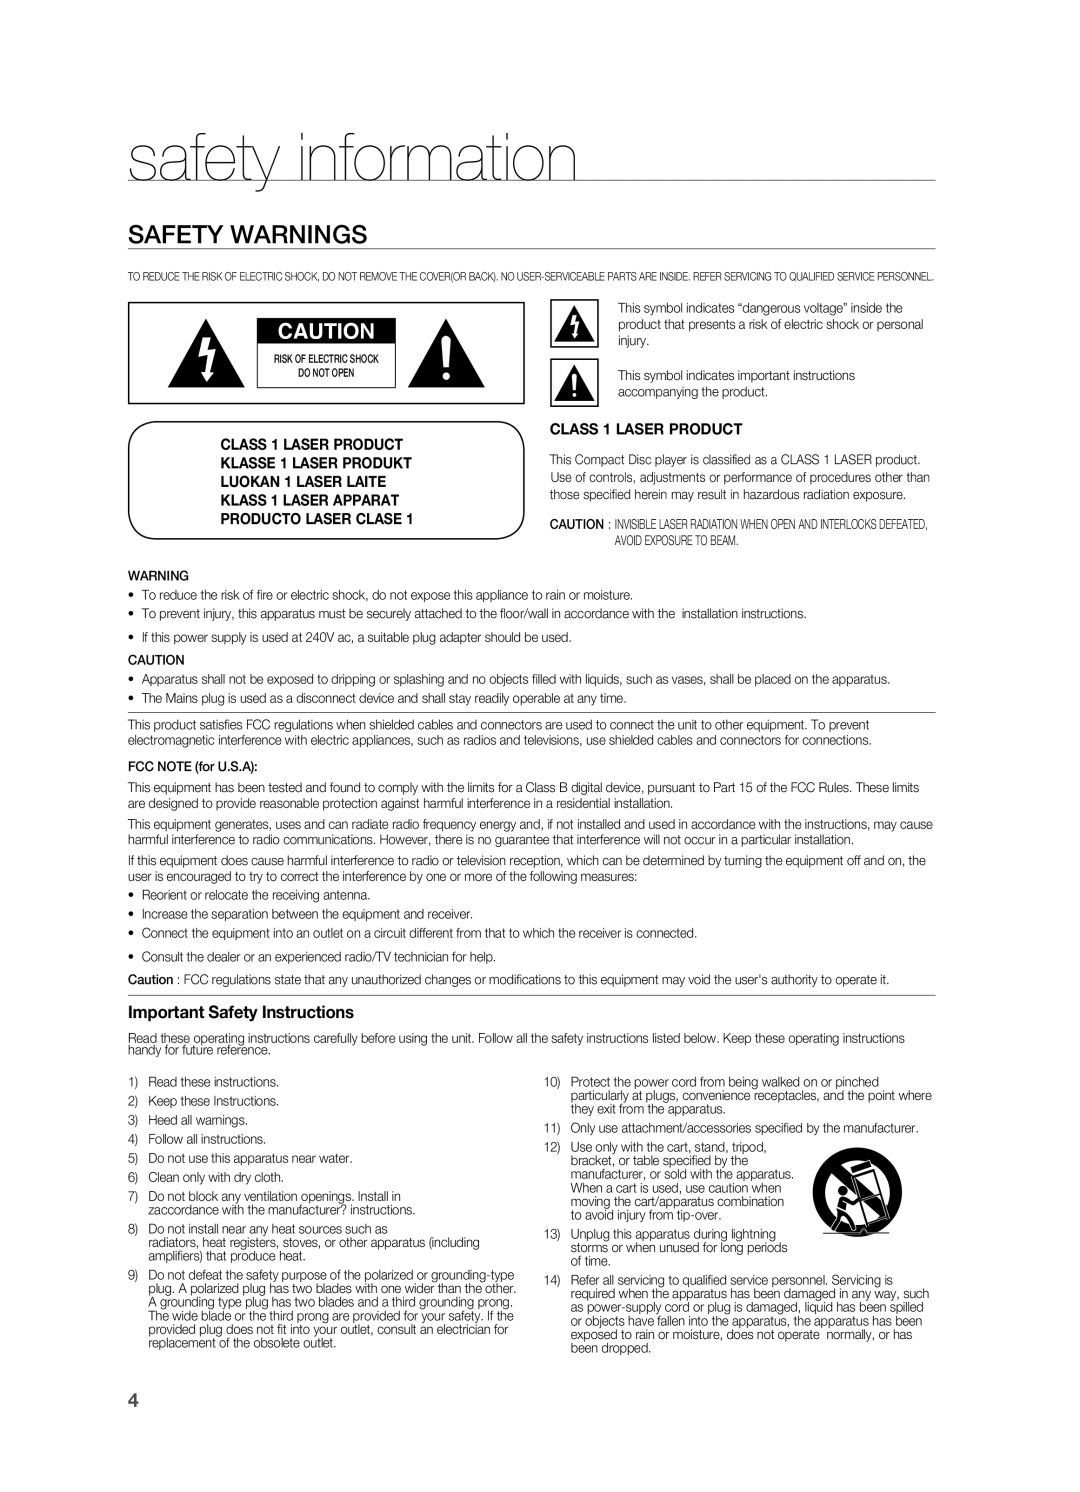 Samsung HT-BD2 manual safety information, Safety Warnings, Important Safety Instructions, Producto Laser Clase 